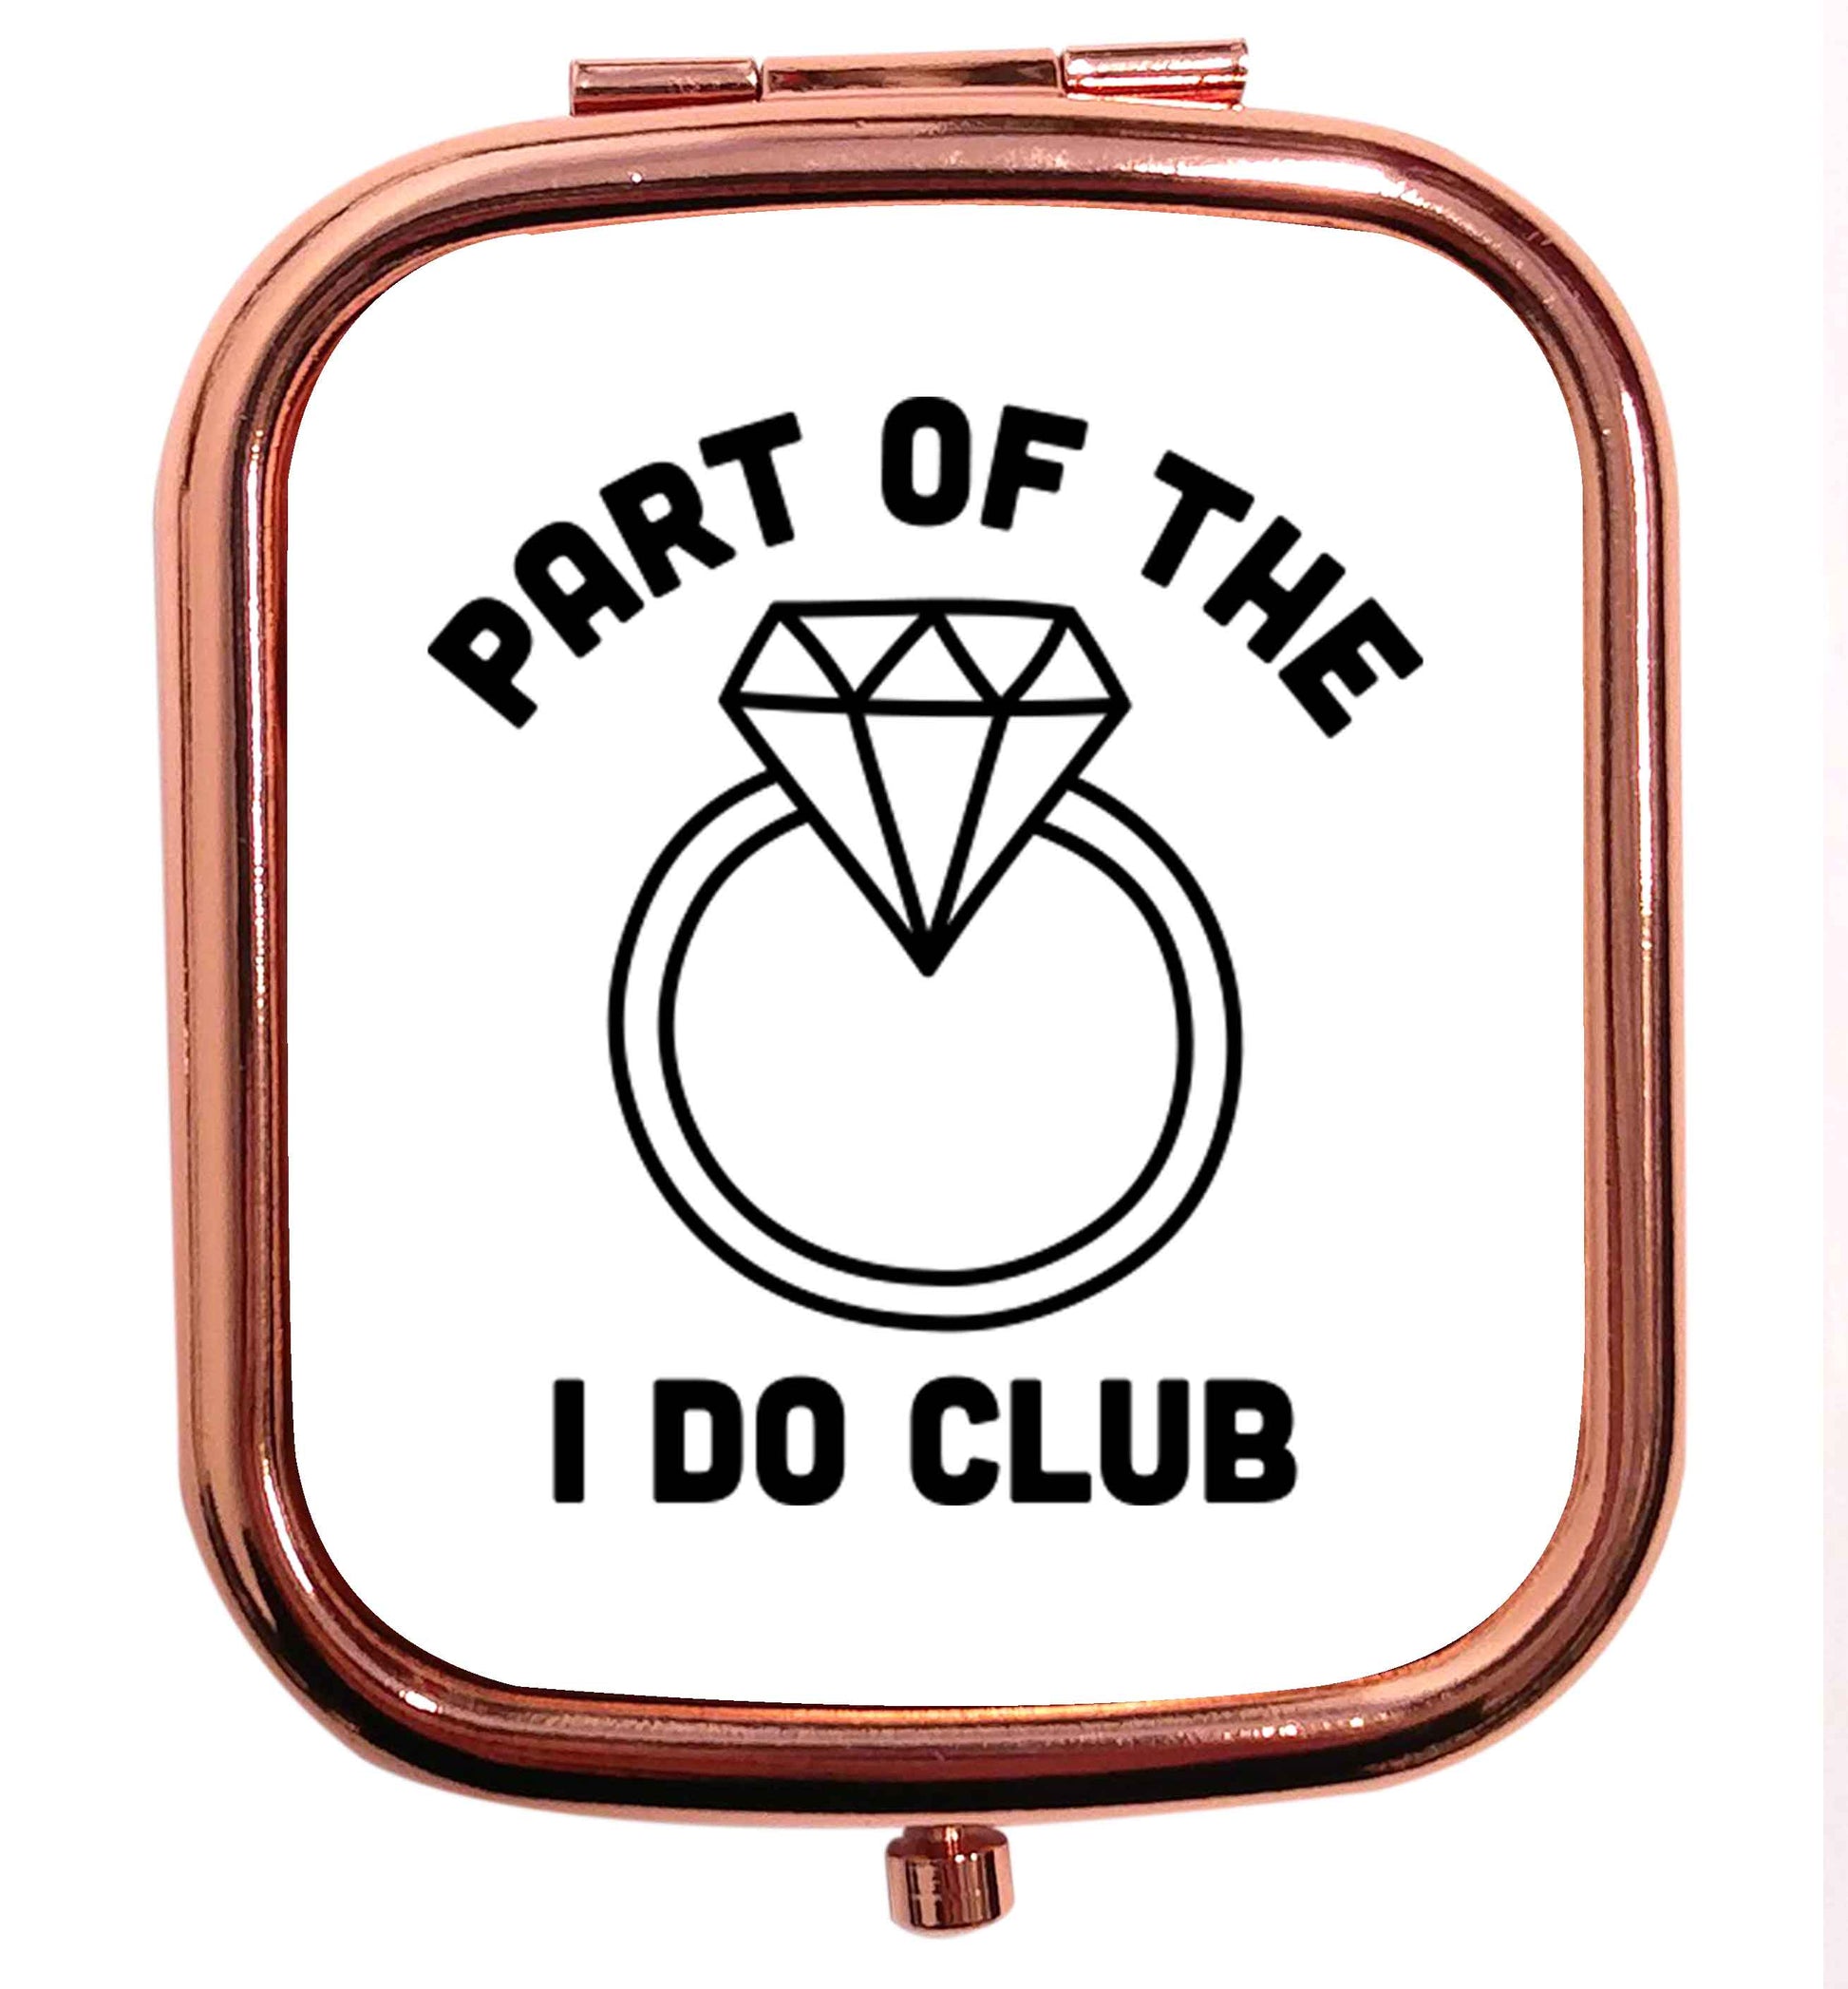 Part of the I do club rose gold square pocket mirror